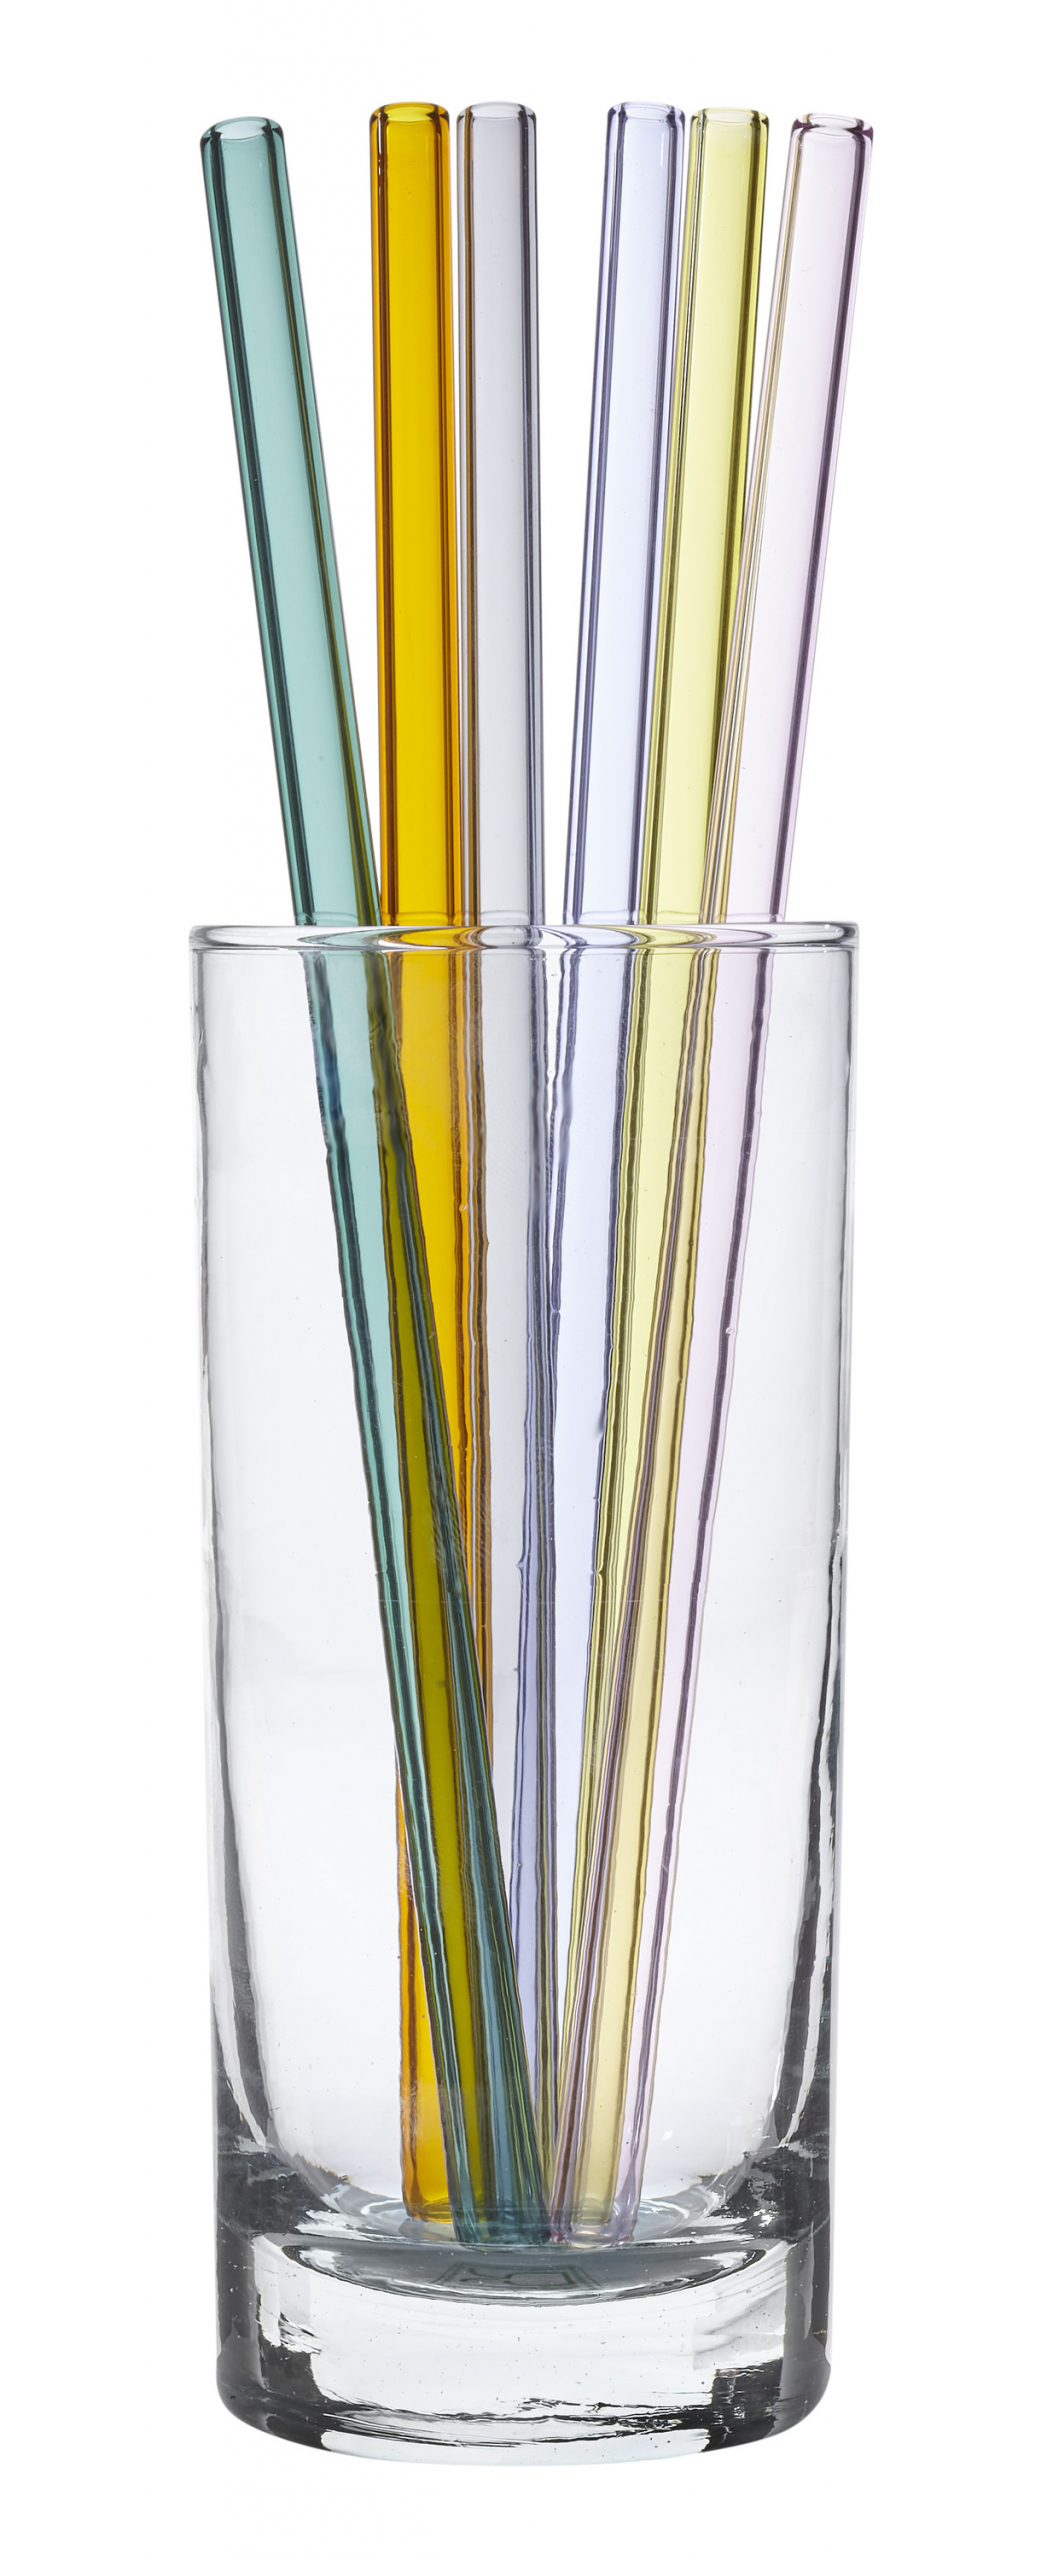 Drinking straws made of coloured glass